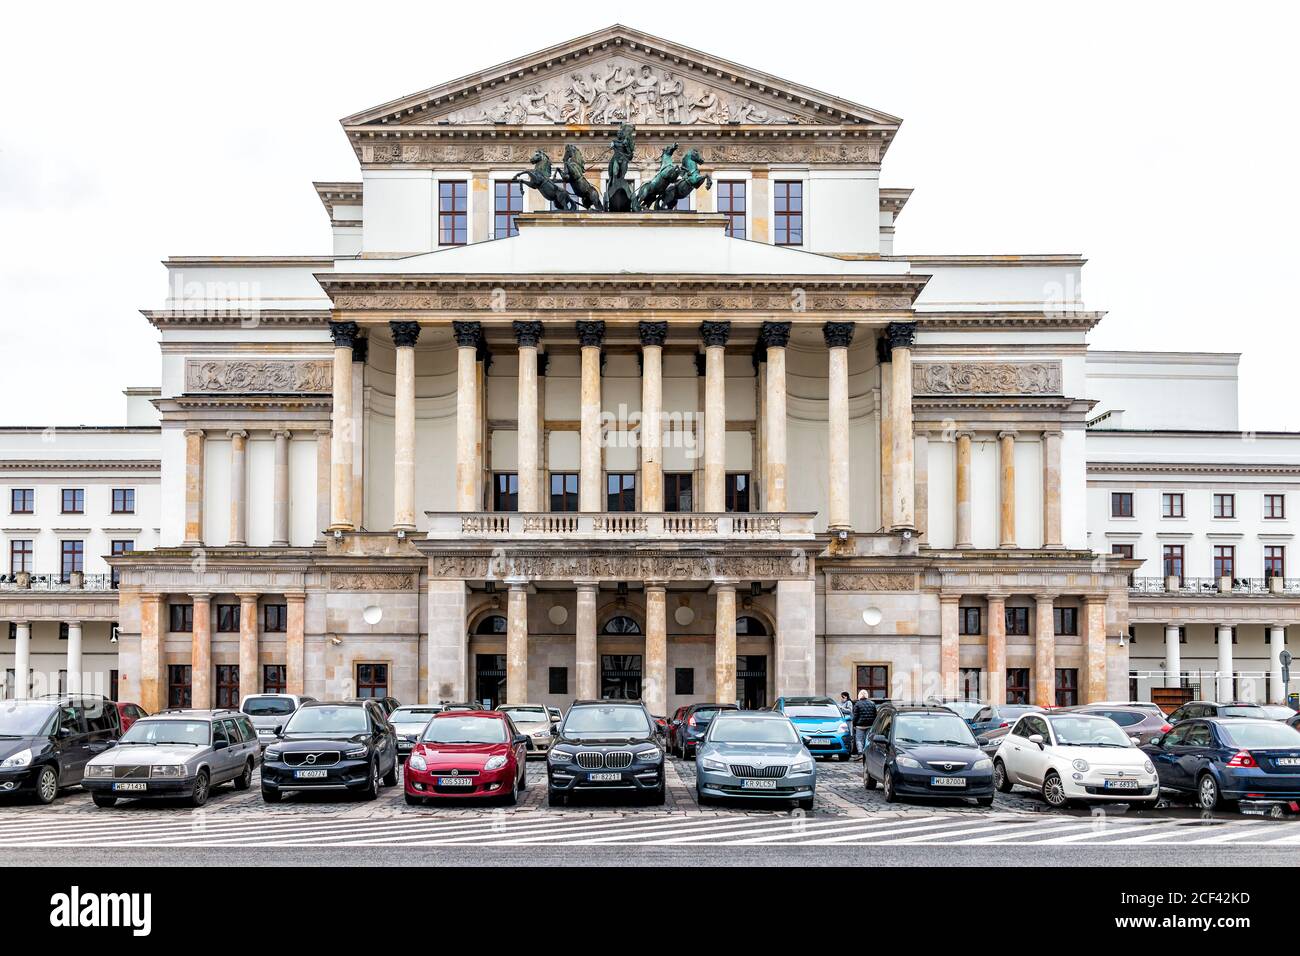 Warsaw, Poland - December 25, 2019: National opera n winter of Warszawa cloudy day exterior facade architecture view and stone columns with cars in pa Stock Photo